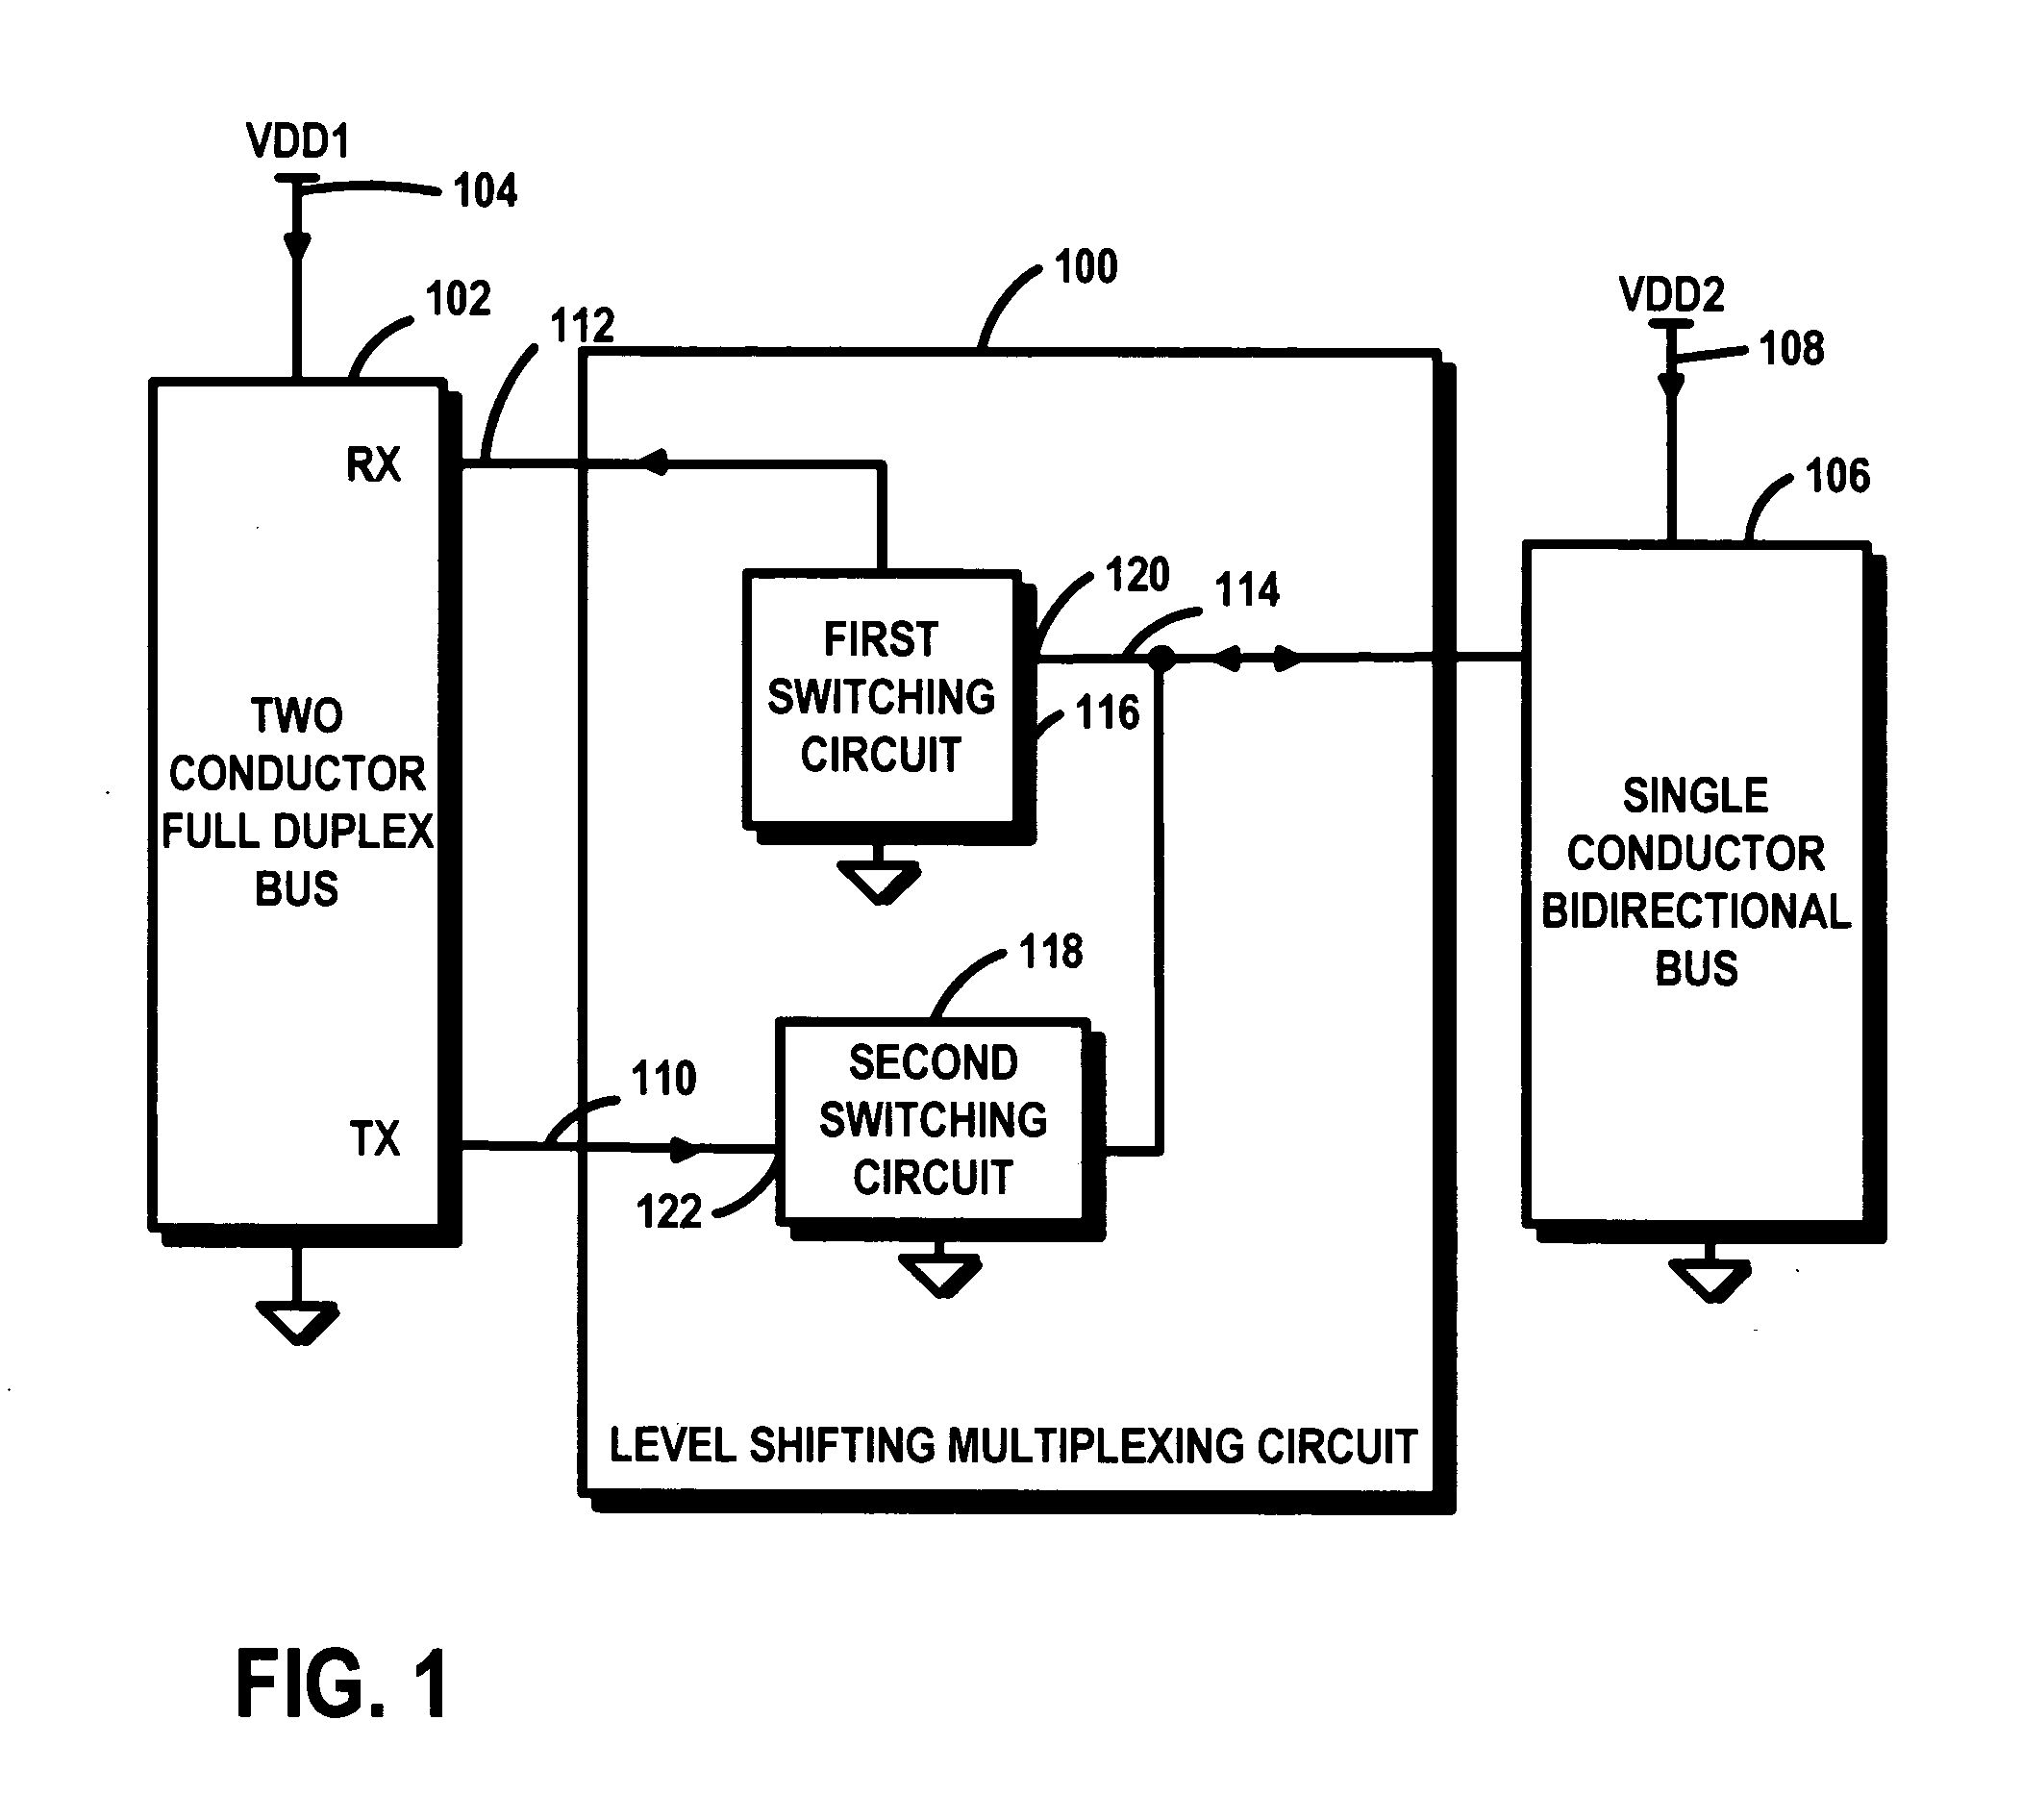 Level shifting multiplexing circuit for connecting a two conductor full duplex bus to a bidirectional single conductor bus